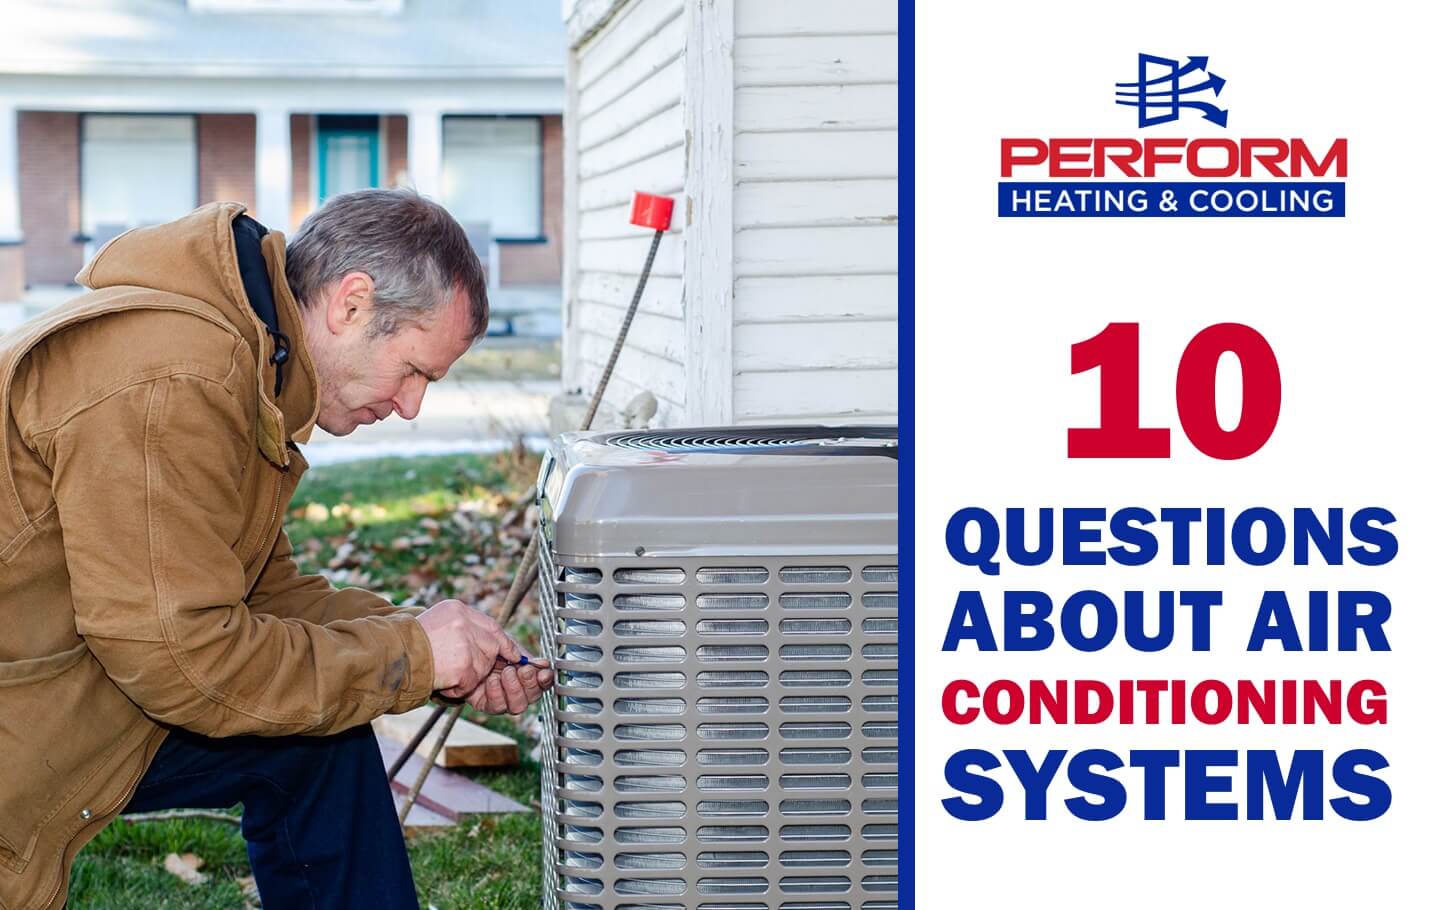 Featured image for “Top 10 Frequently Asked Questions about Air Conditioning Systems”